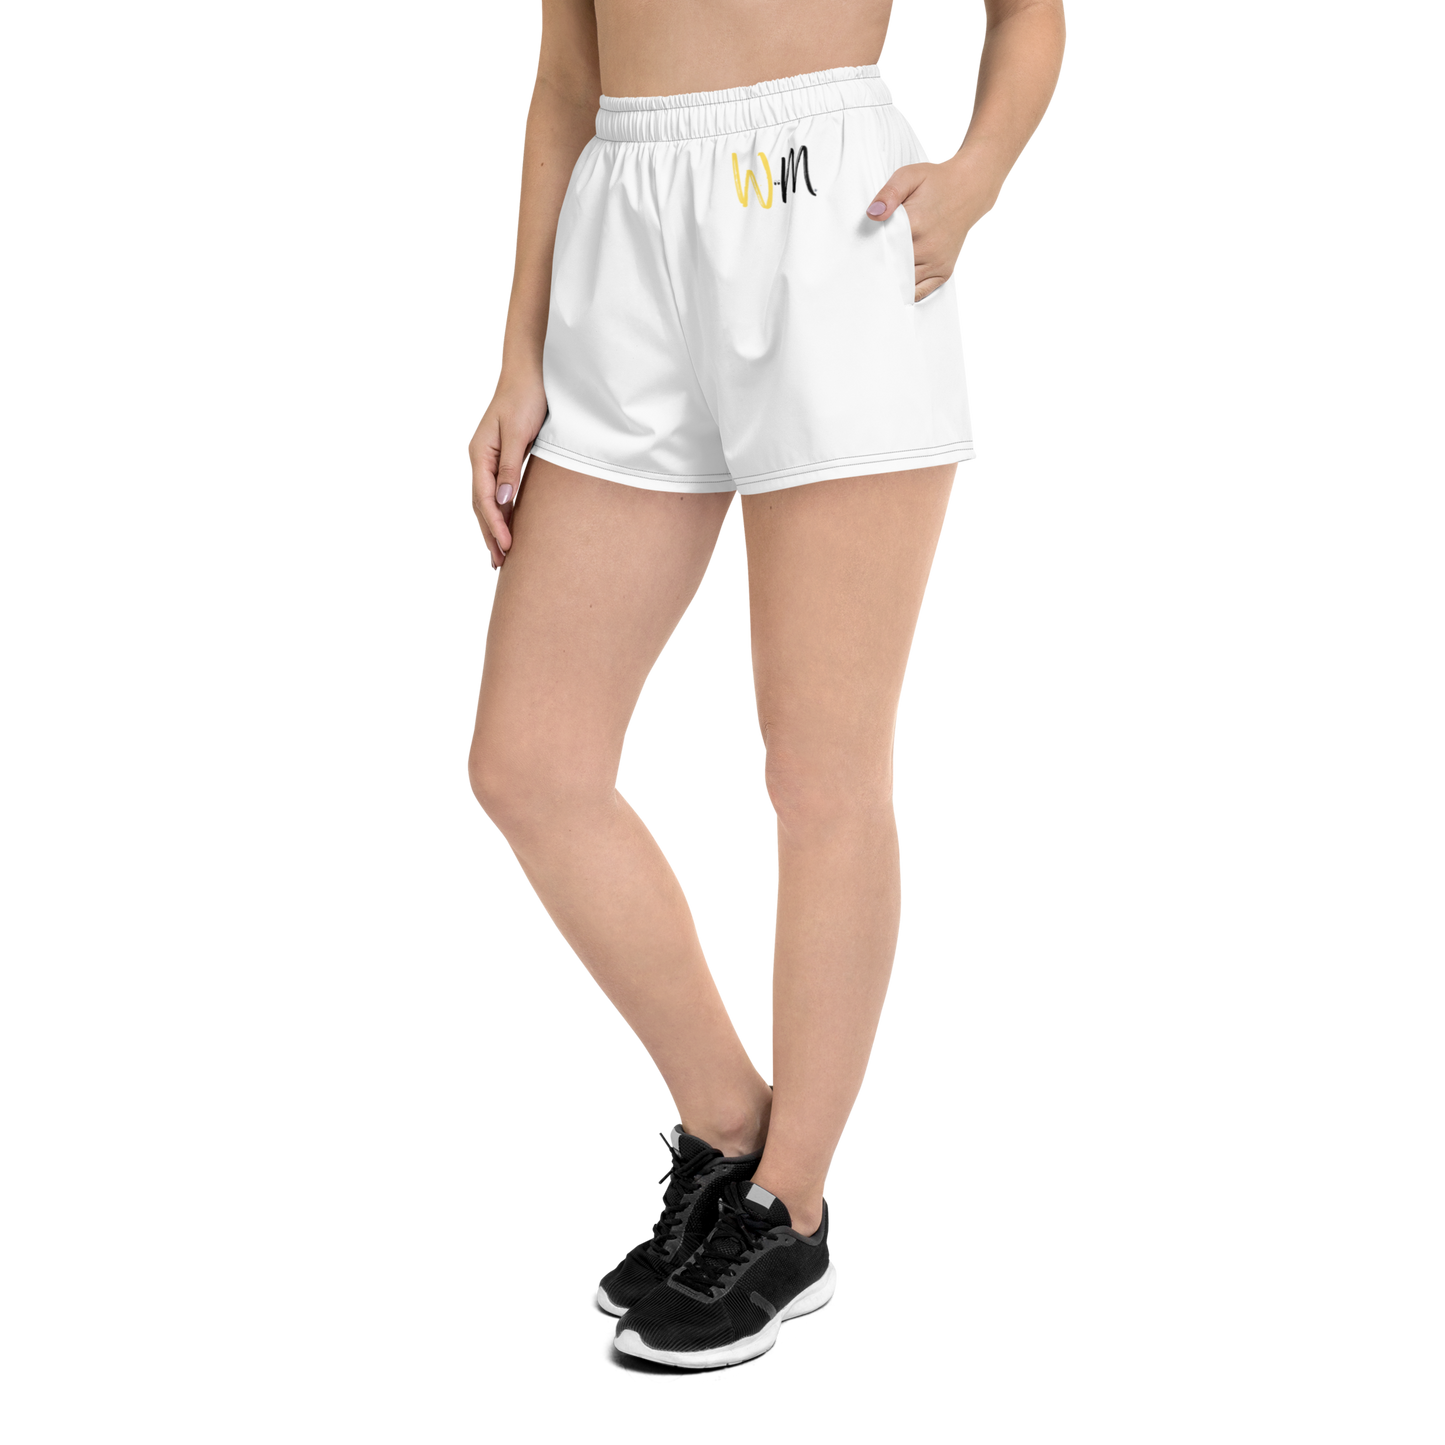 'Watch Me' Women’s Recycled Athletic Shorts